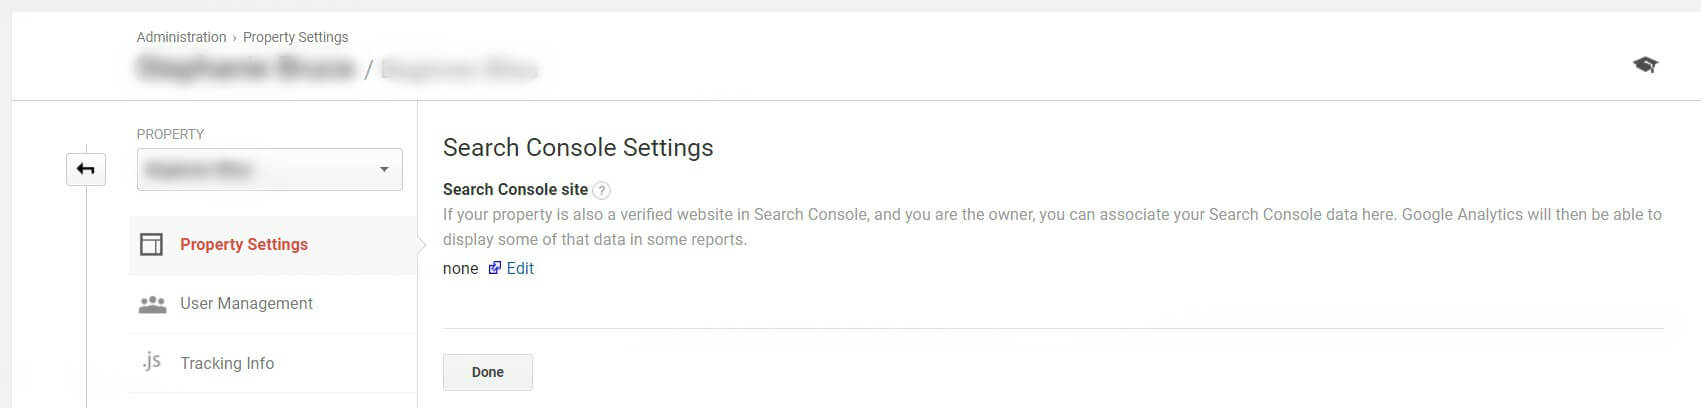 Google Analytics Search Console settings